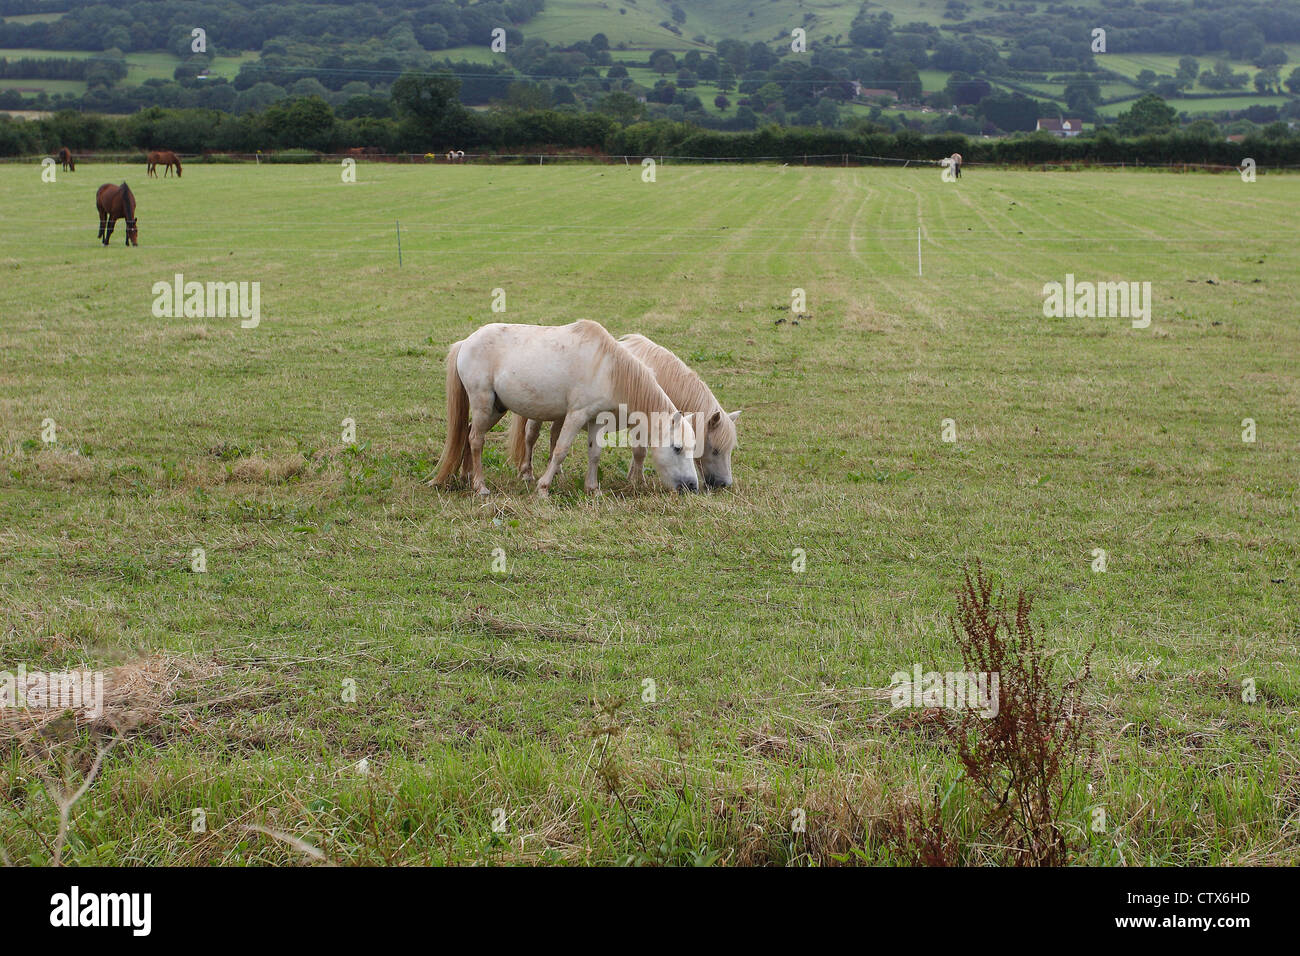 A pair of white Shetland ponies. Stock Photo